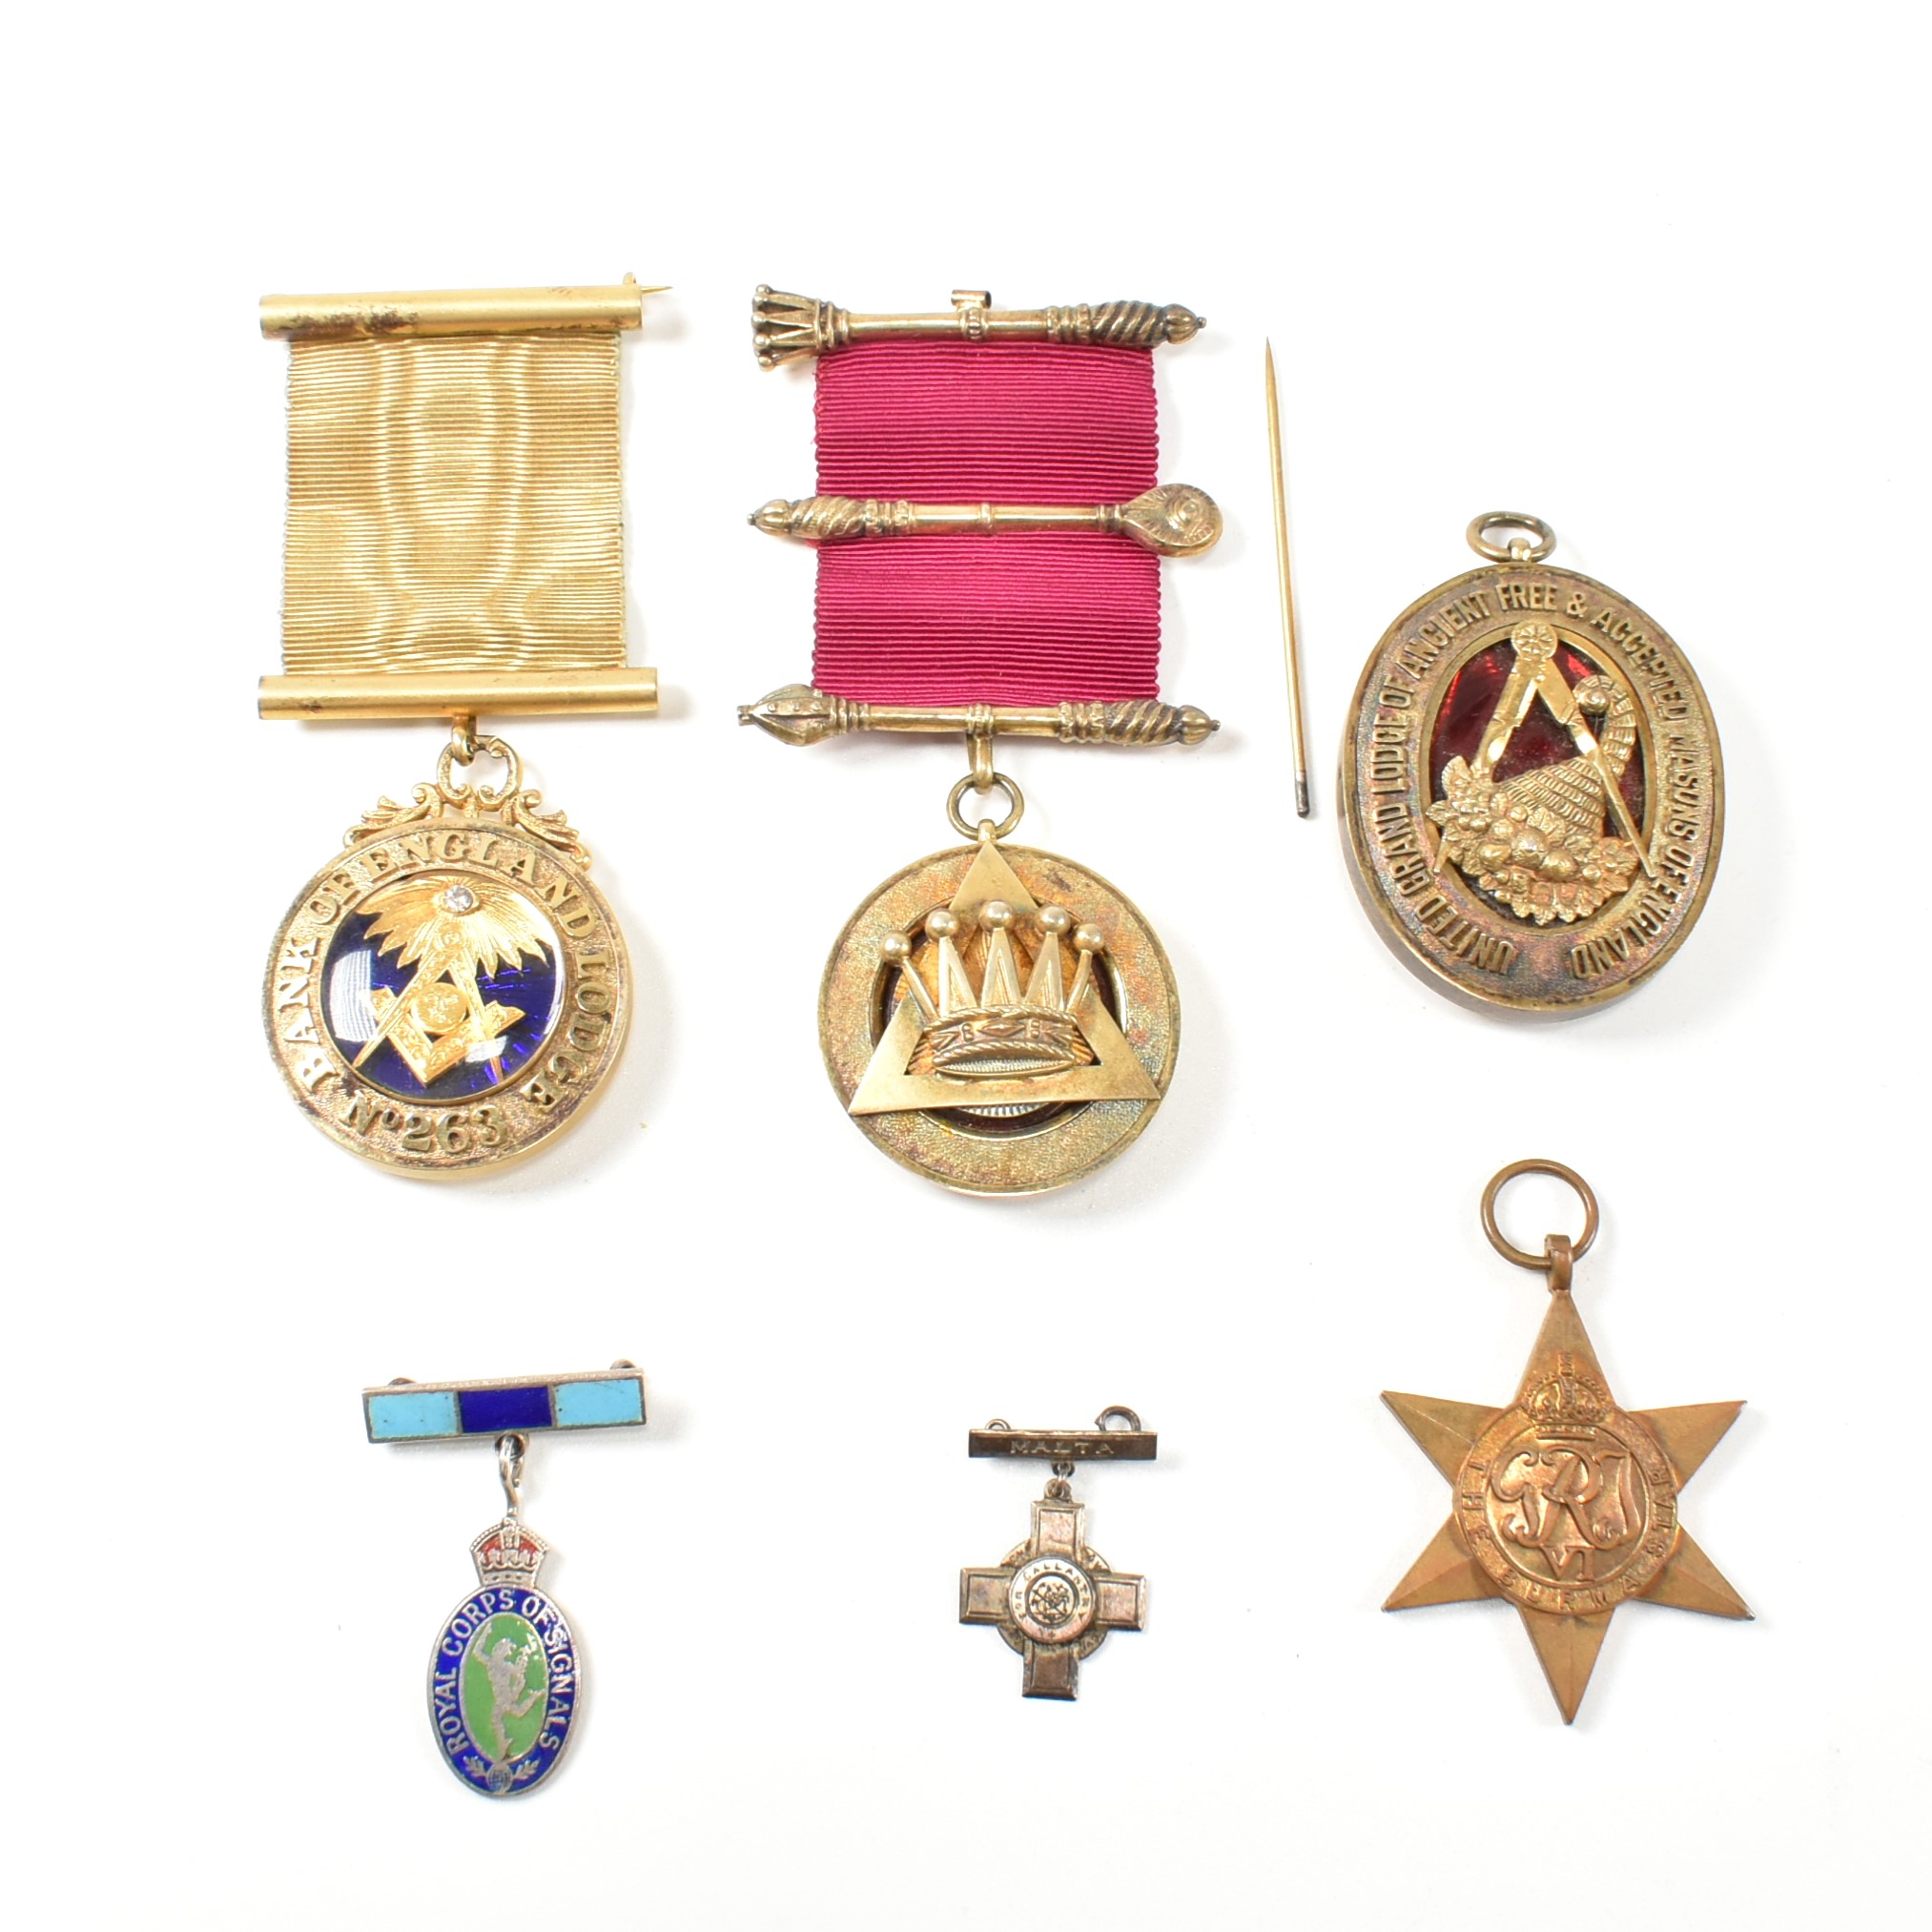 COLLECTION OF EARLY 20TH CENTURY MASONIC MEDALS